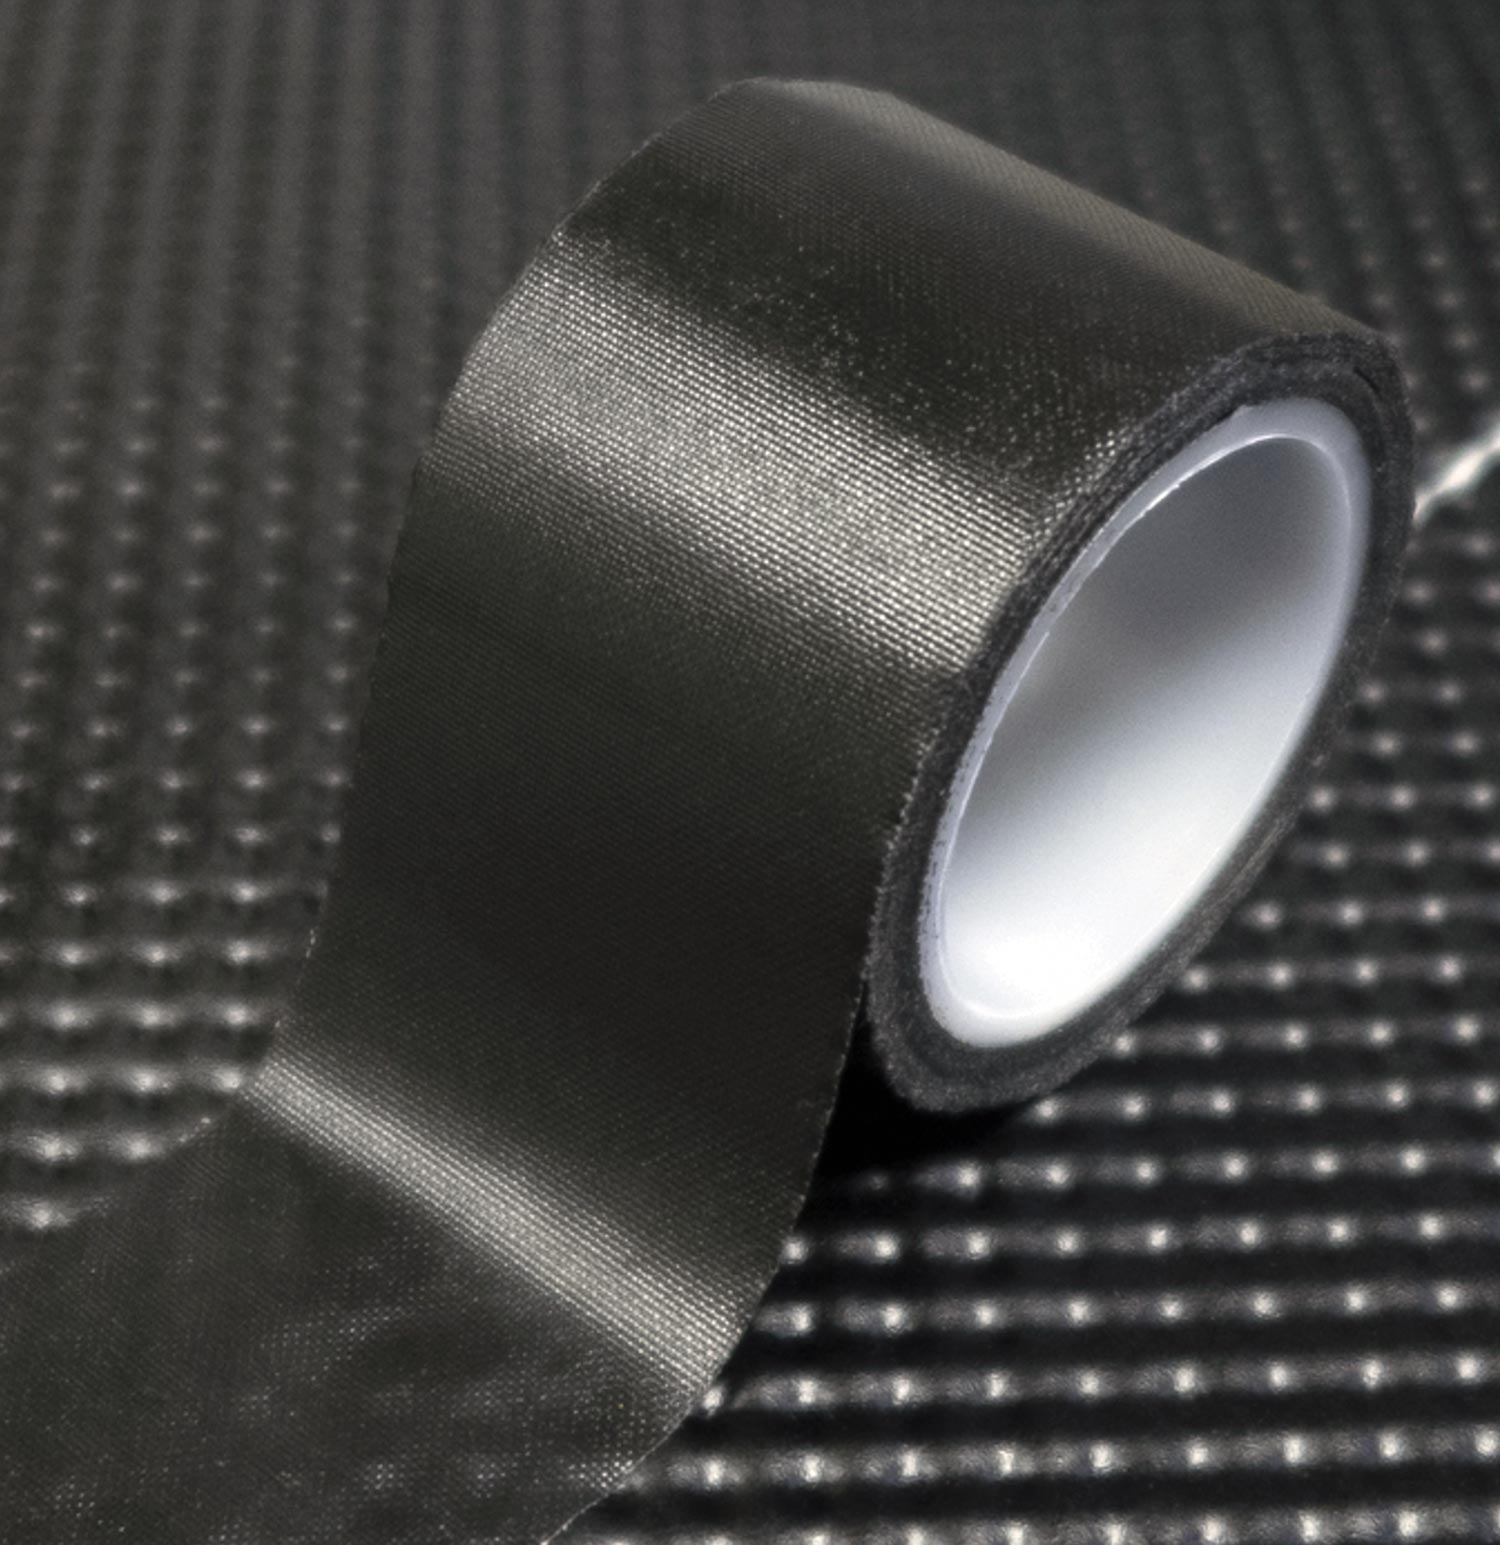 high-adhesive Black Seaming Tape from Design Engineering, Inc.